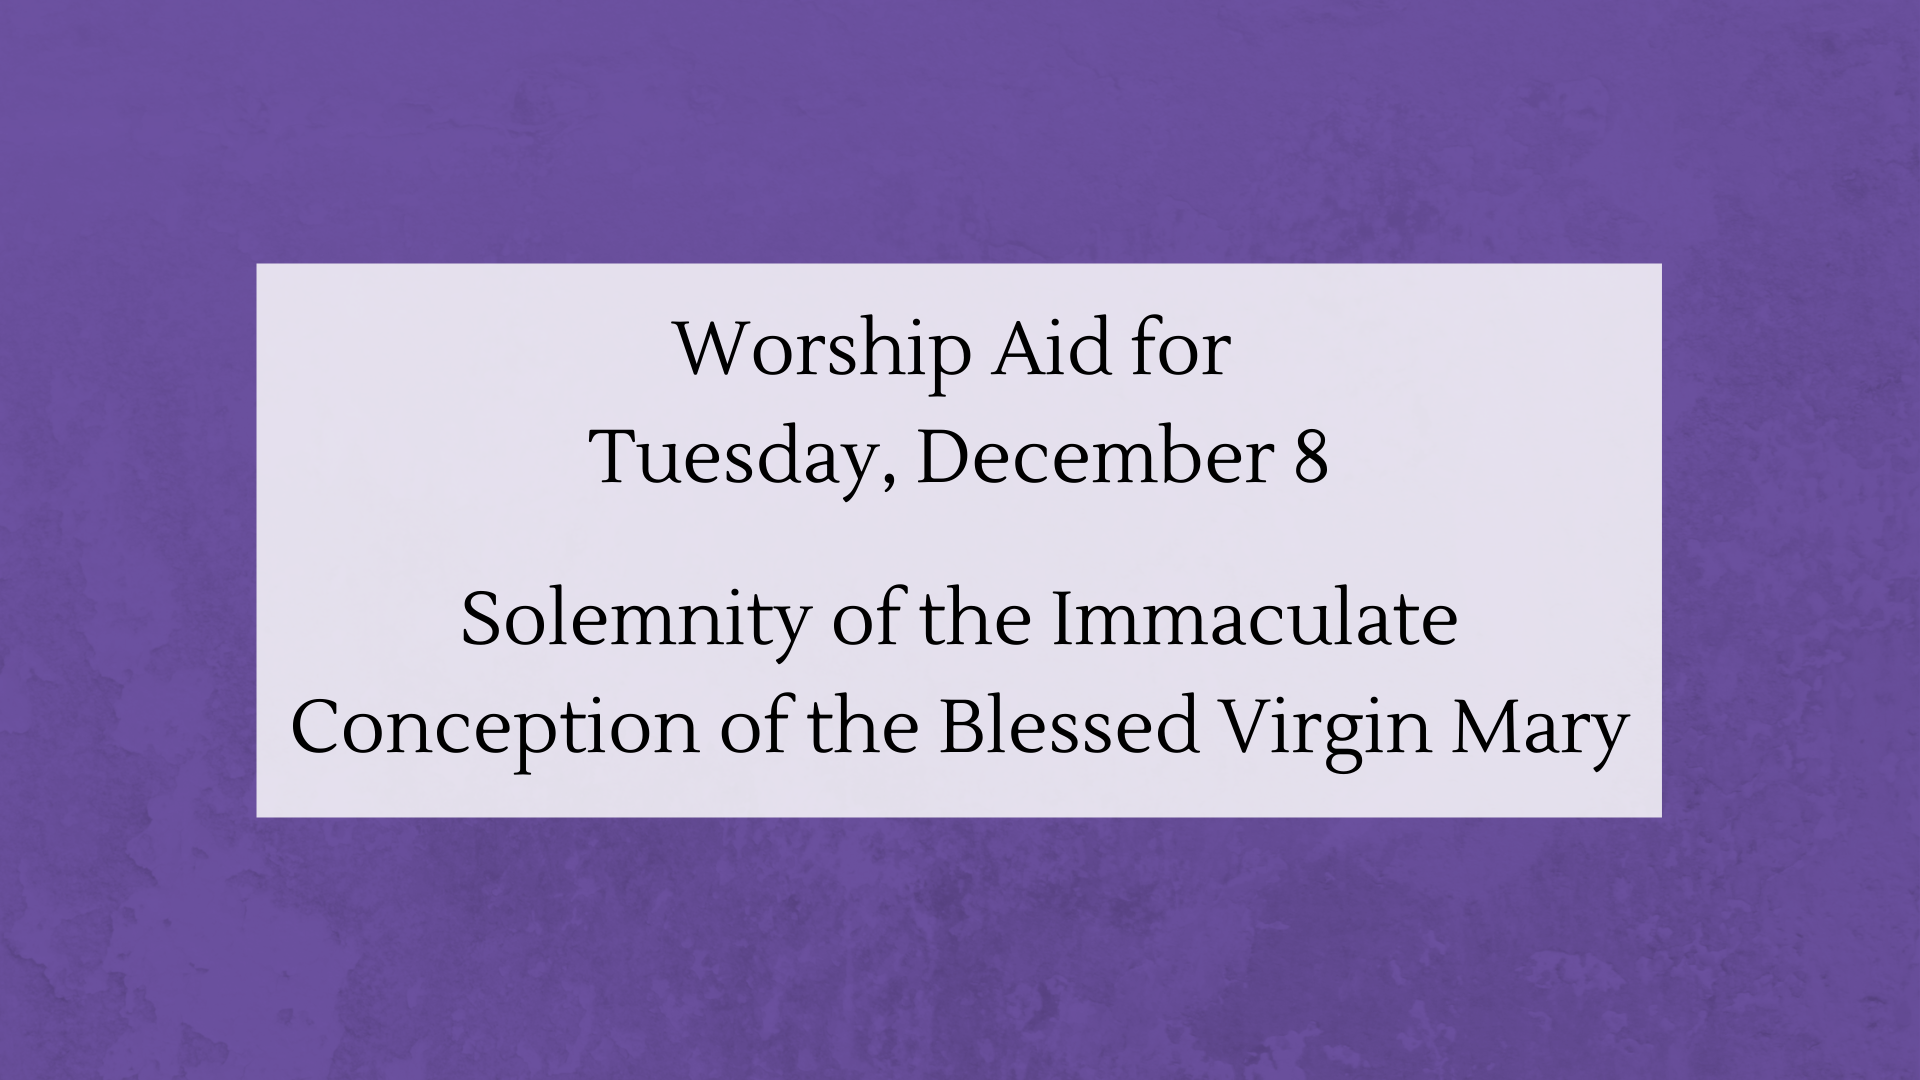 Worship Aid for the Solemnity of the Immaculate Conception of the Blessed Virgin Mary